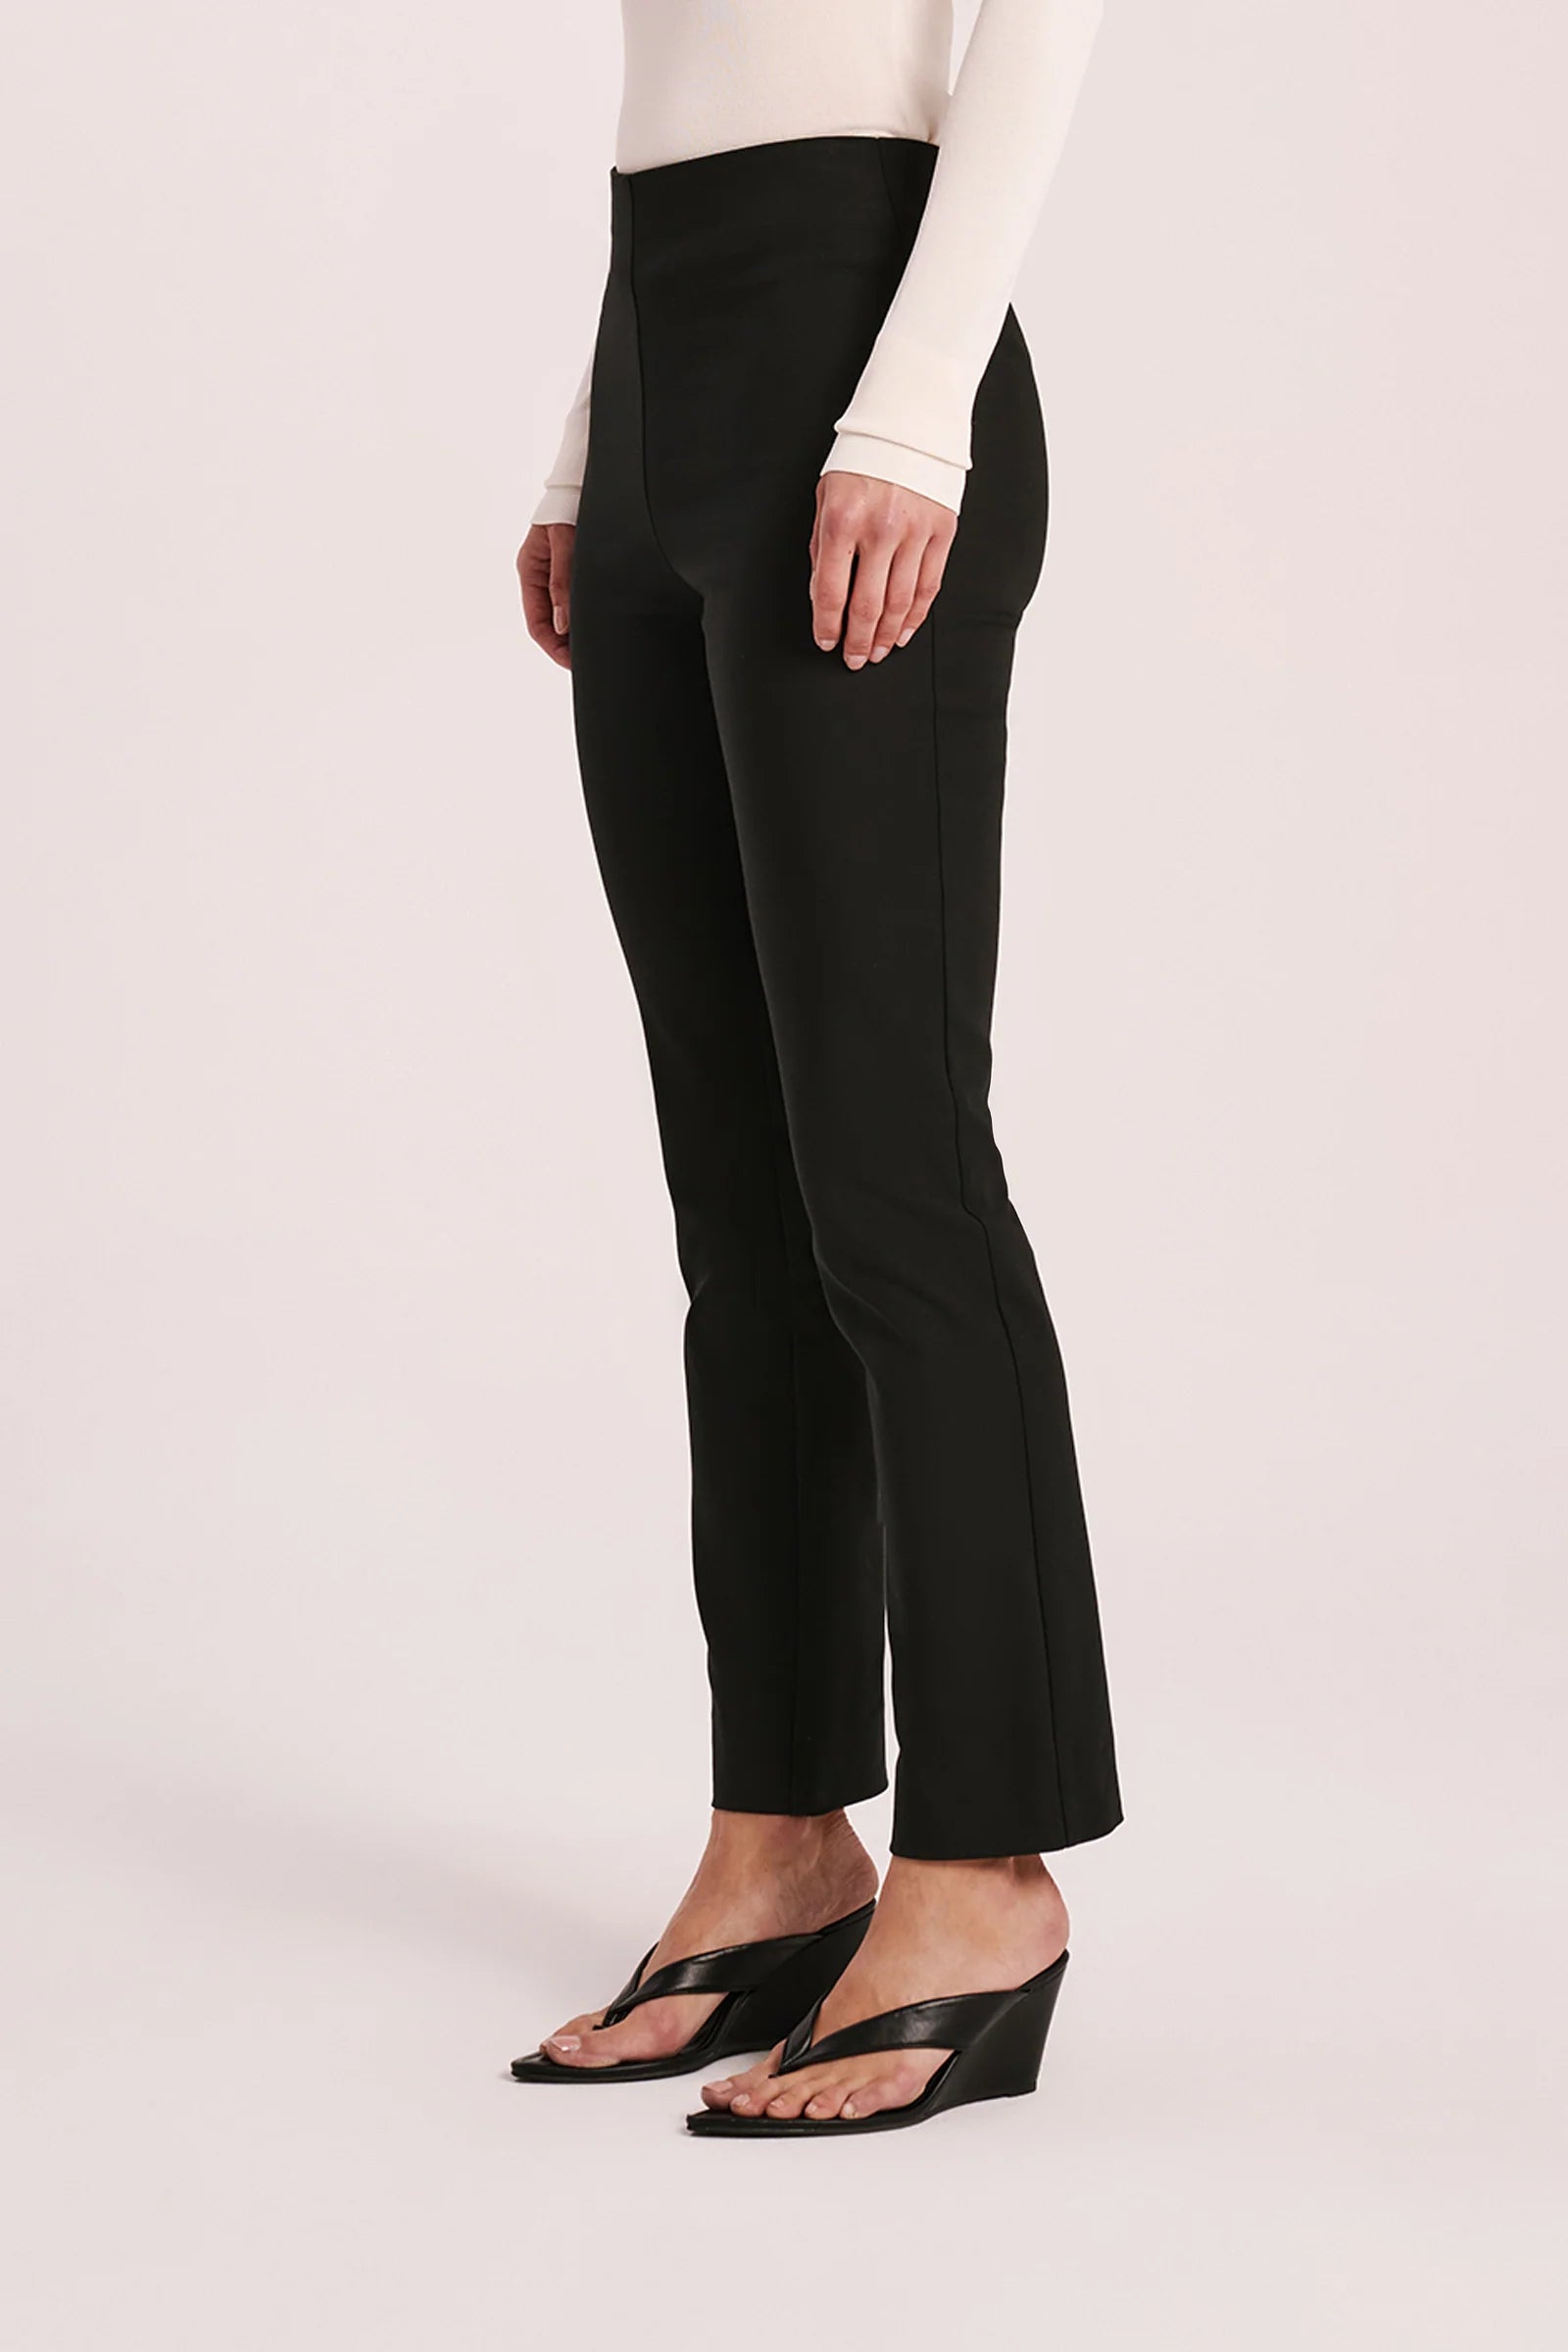 Nude Lucy | Delyse Pant - Black